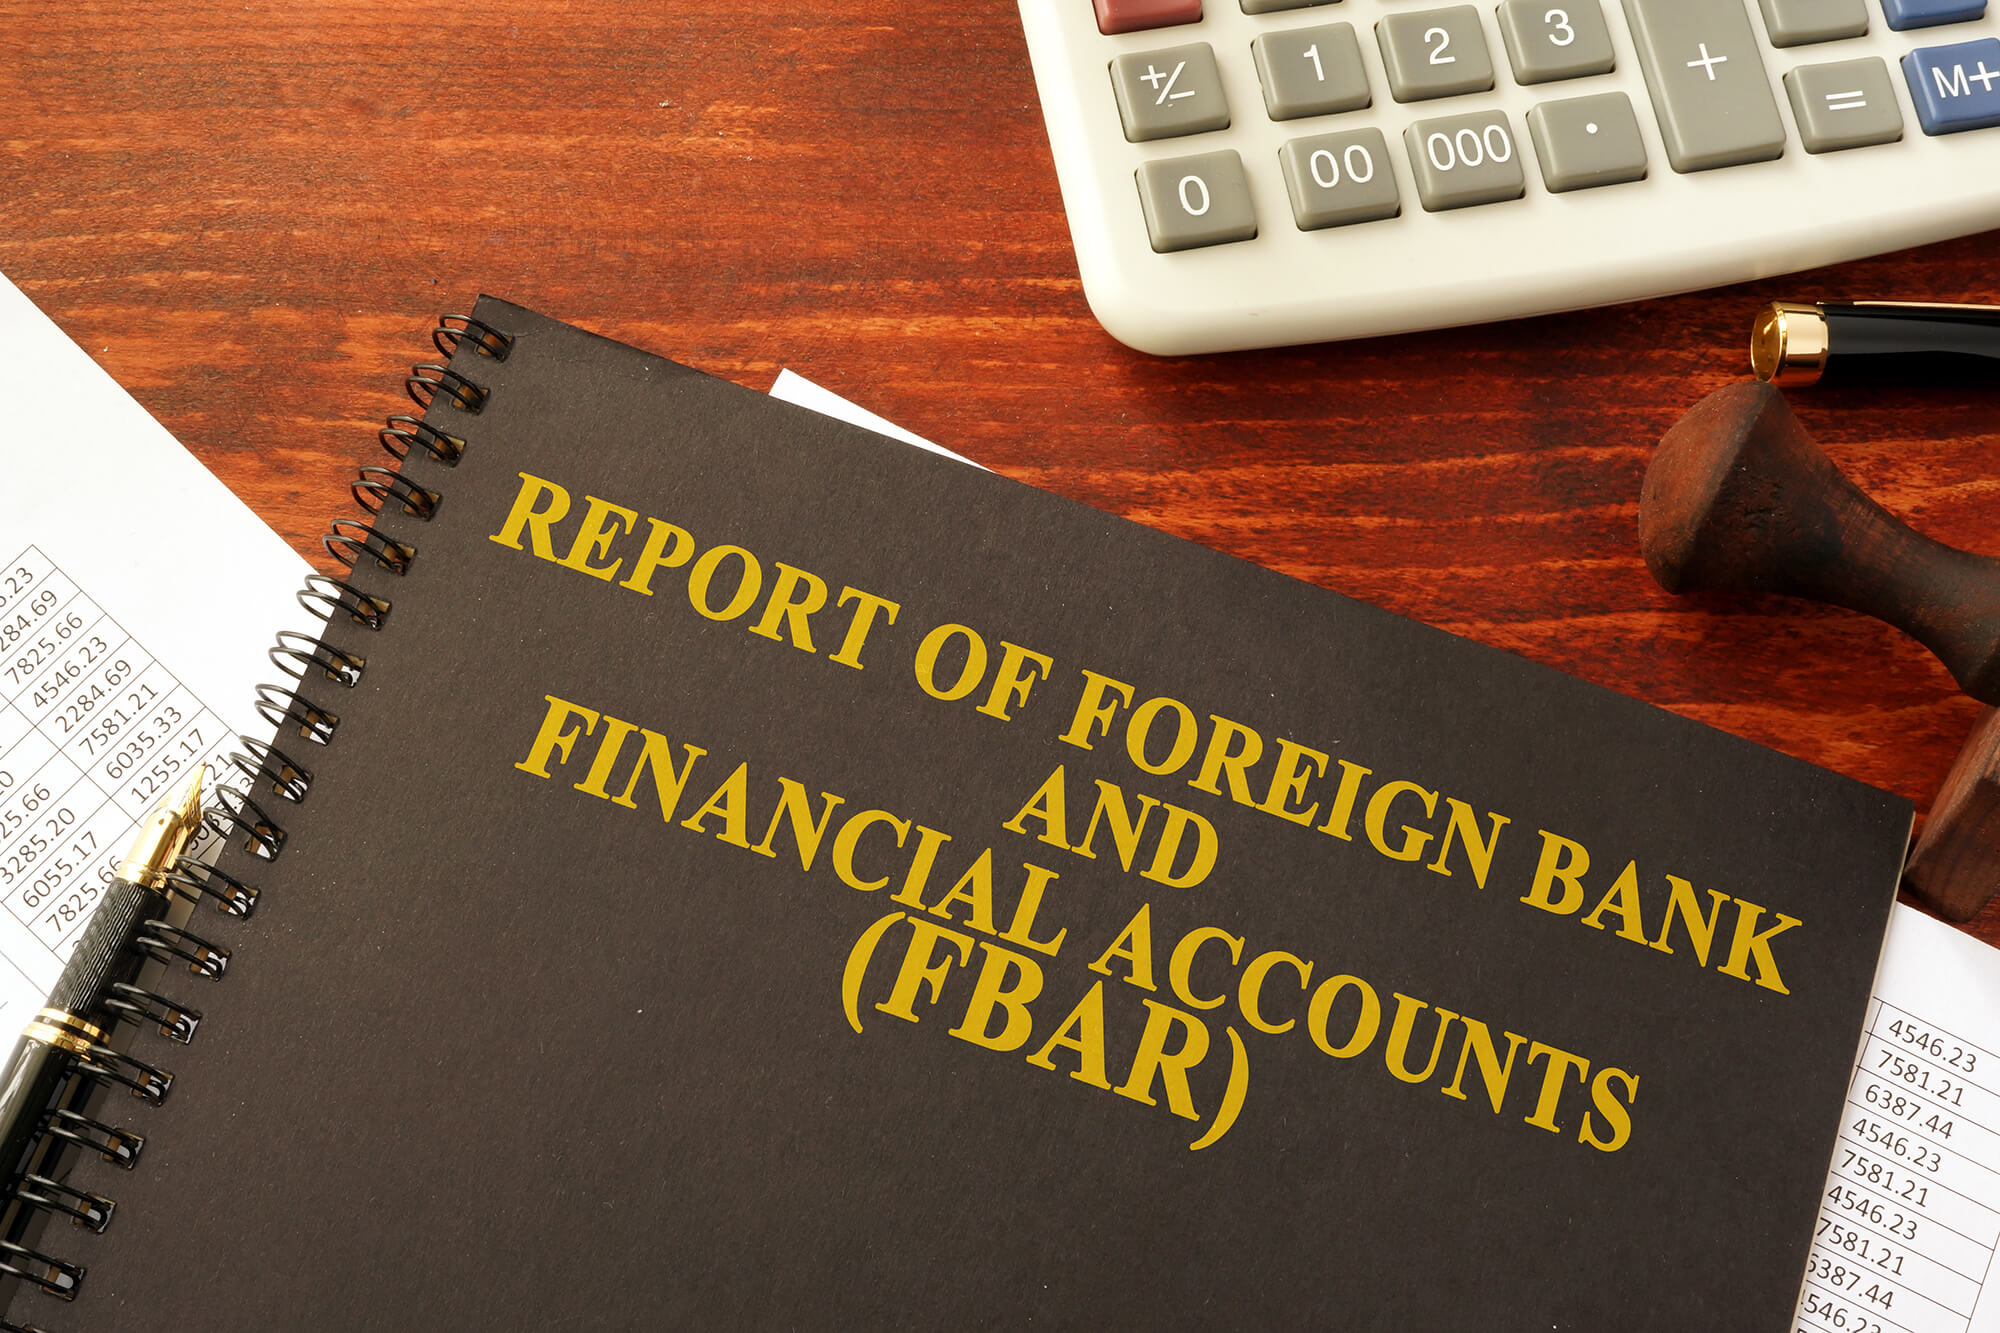 Foreign Bank and Financial Accounts (FBAR) Filing Services